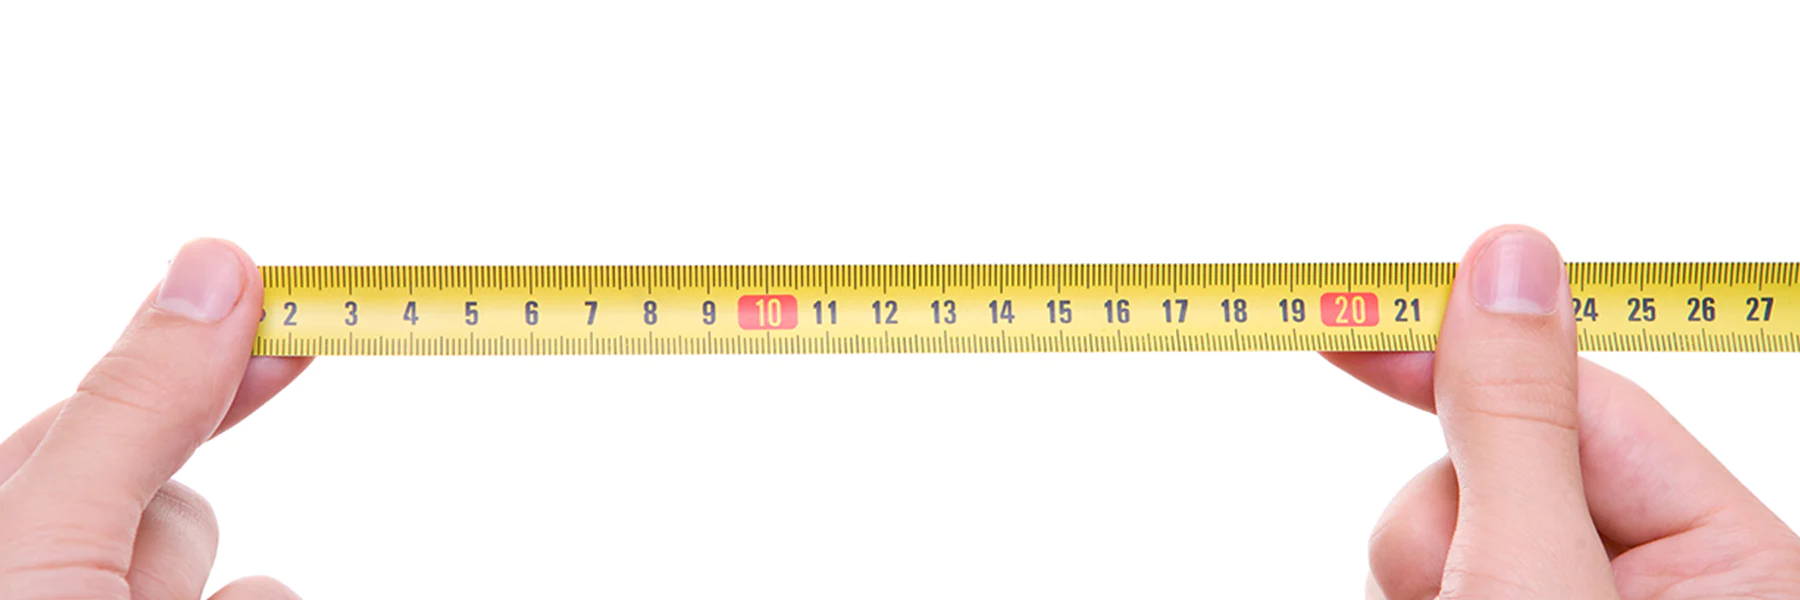 Bracelet Sizing Guide: Learn How to Measure Your Bracelet Size